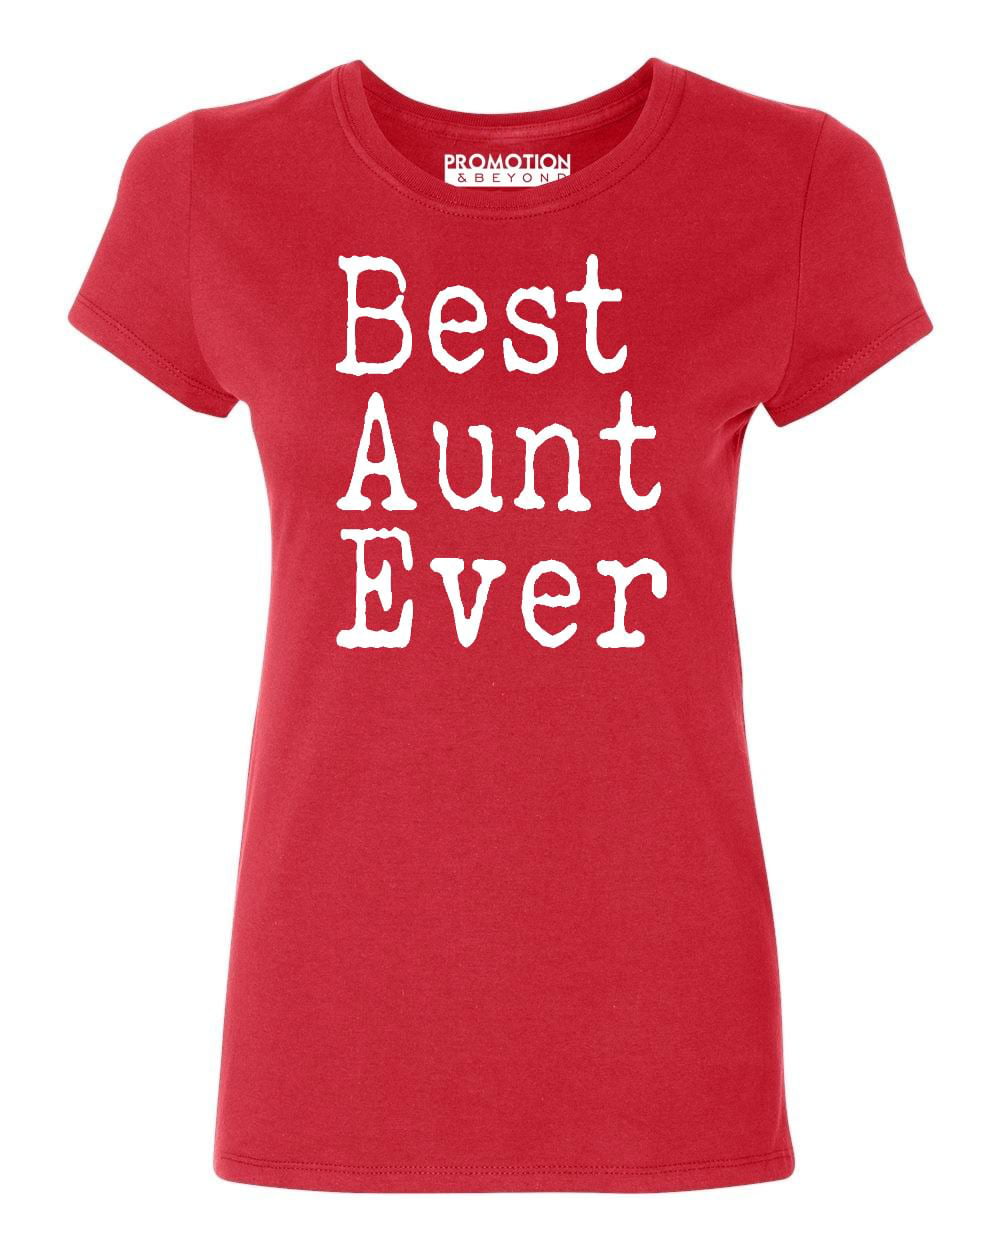 BEST AUNT EVER Shirt for Aunt Short-Sleeve Unisex T-Shirt Best Aunt Ever Tshirt Gift for Aunt for Mother's Day